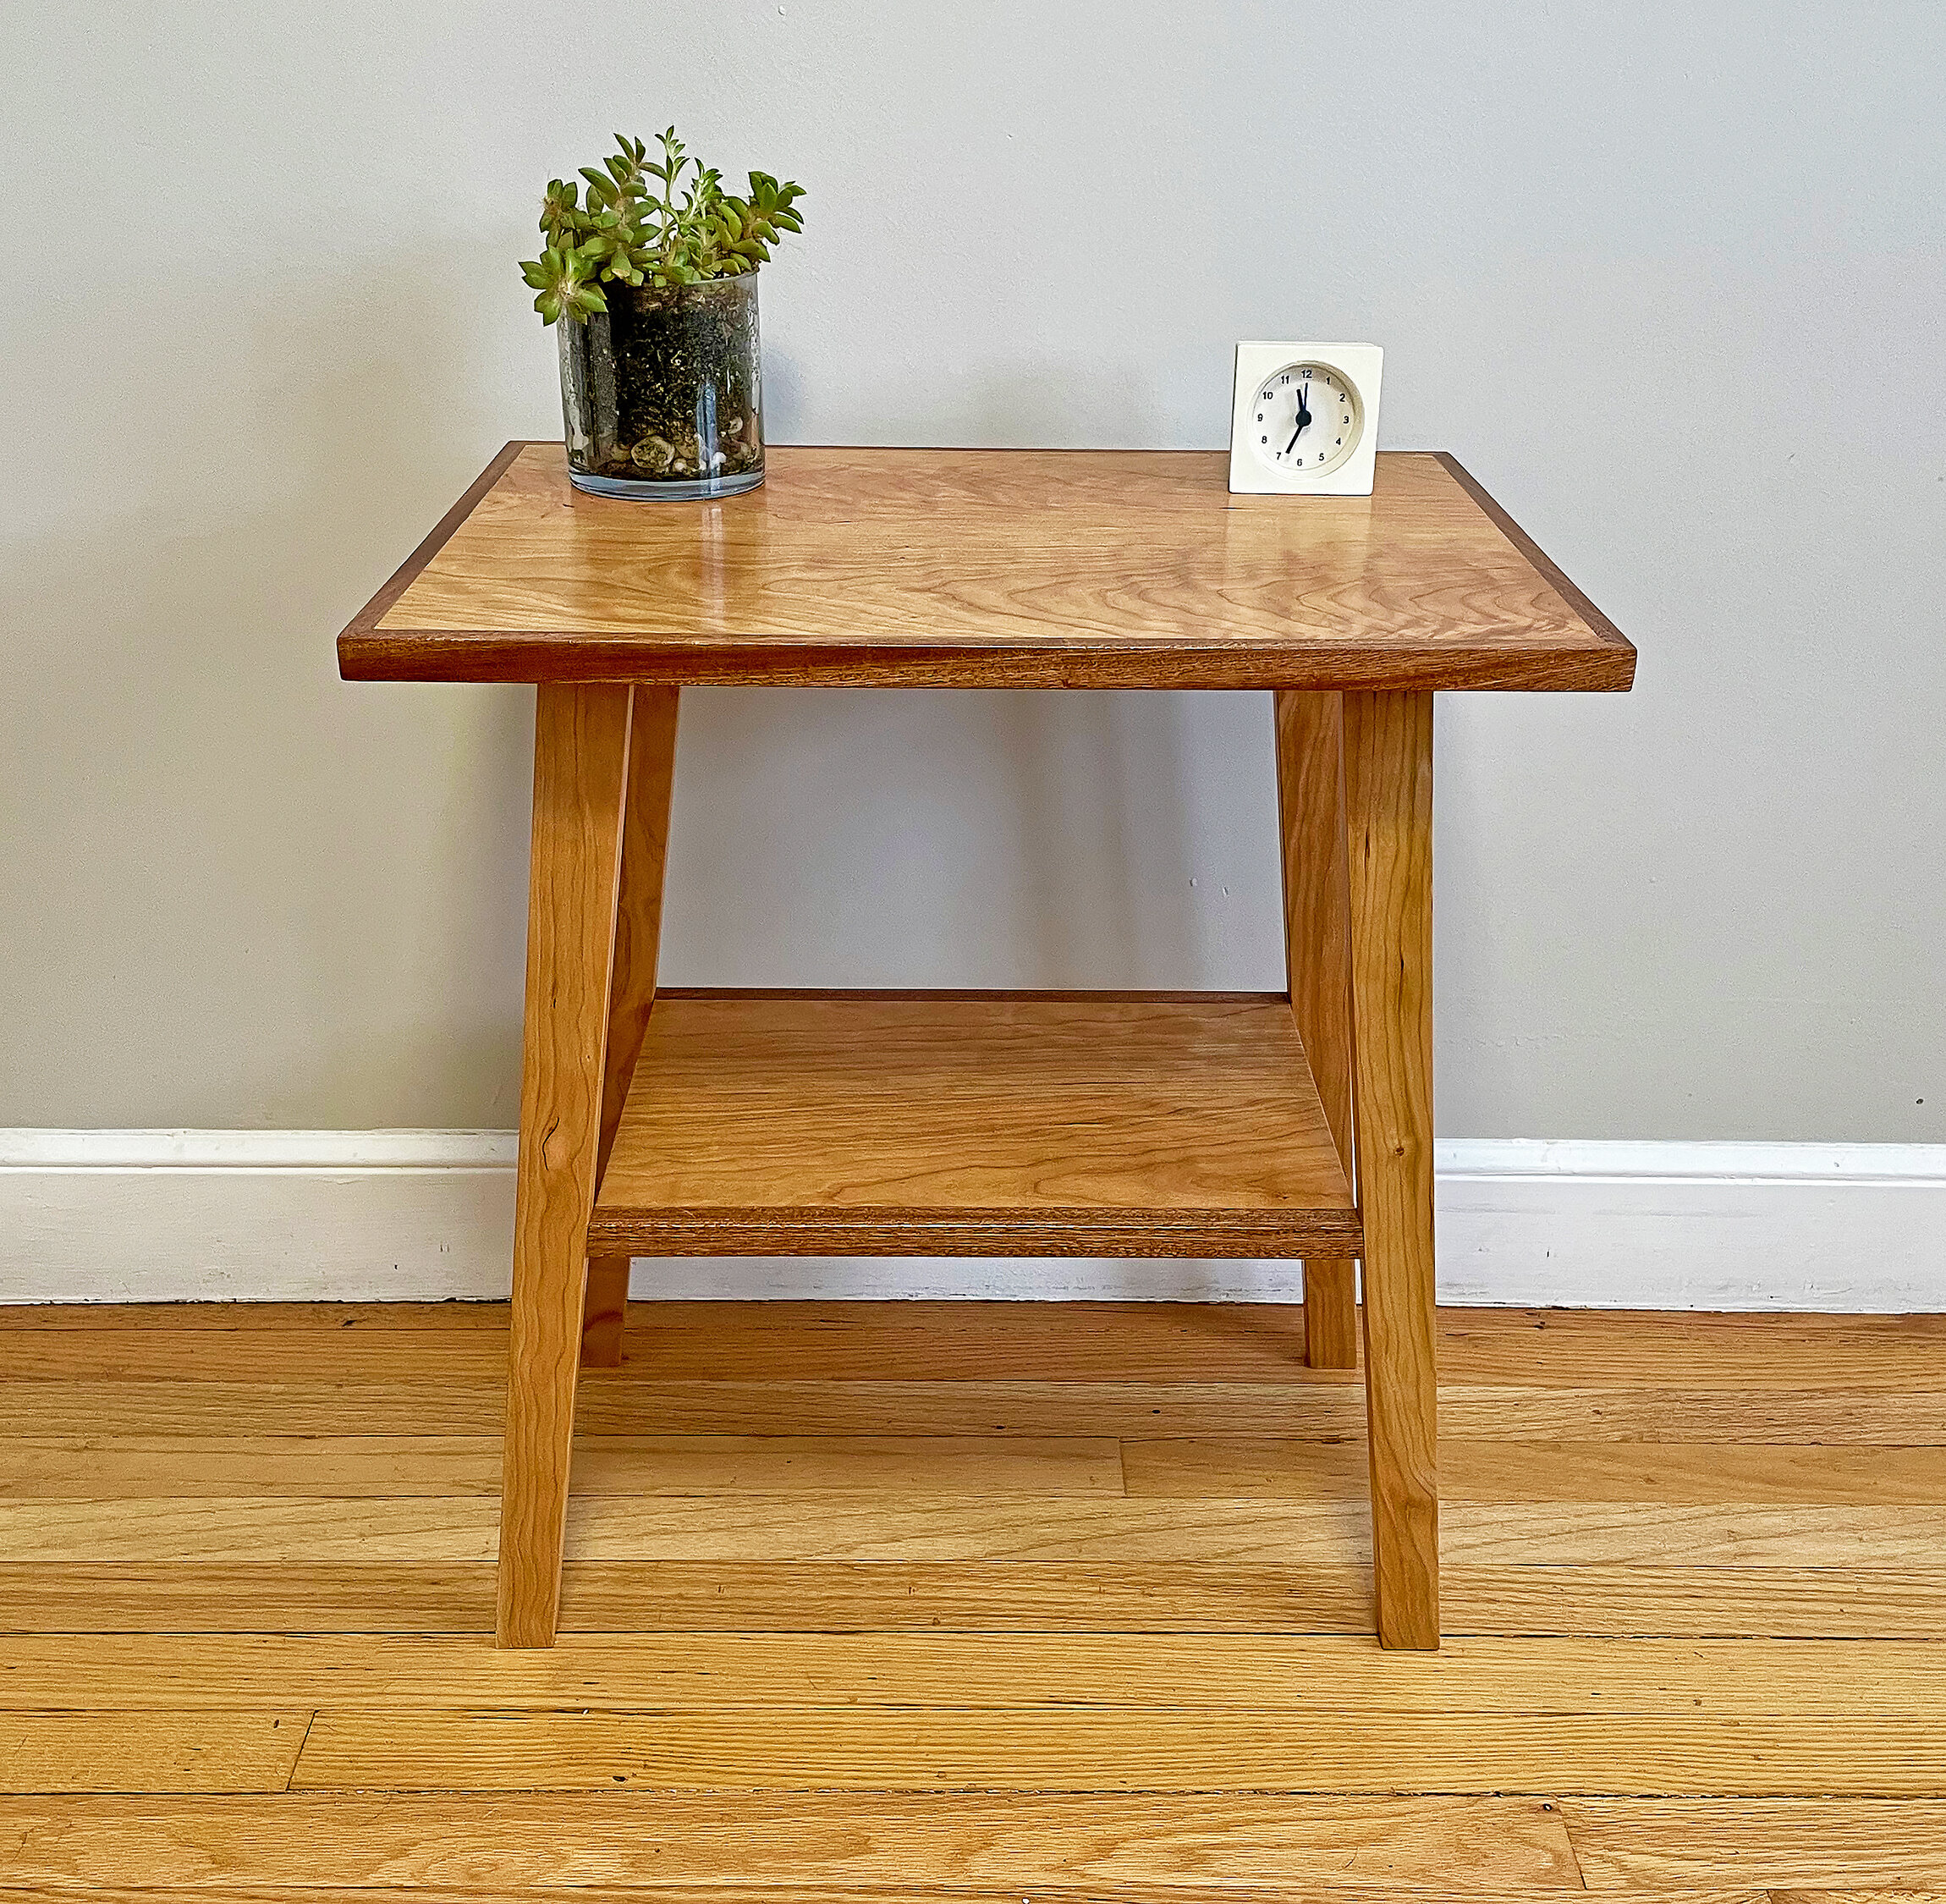 $460 - End table, curly cherry/sapele